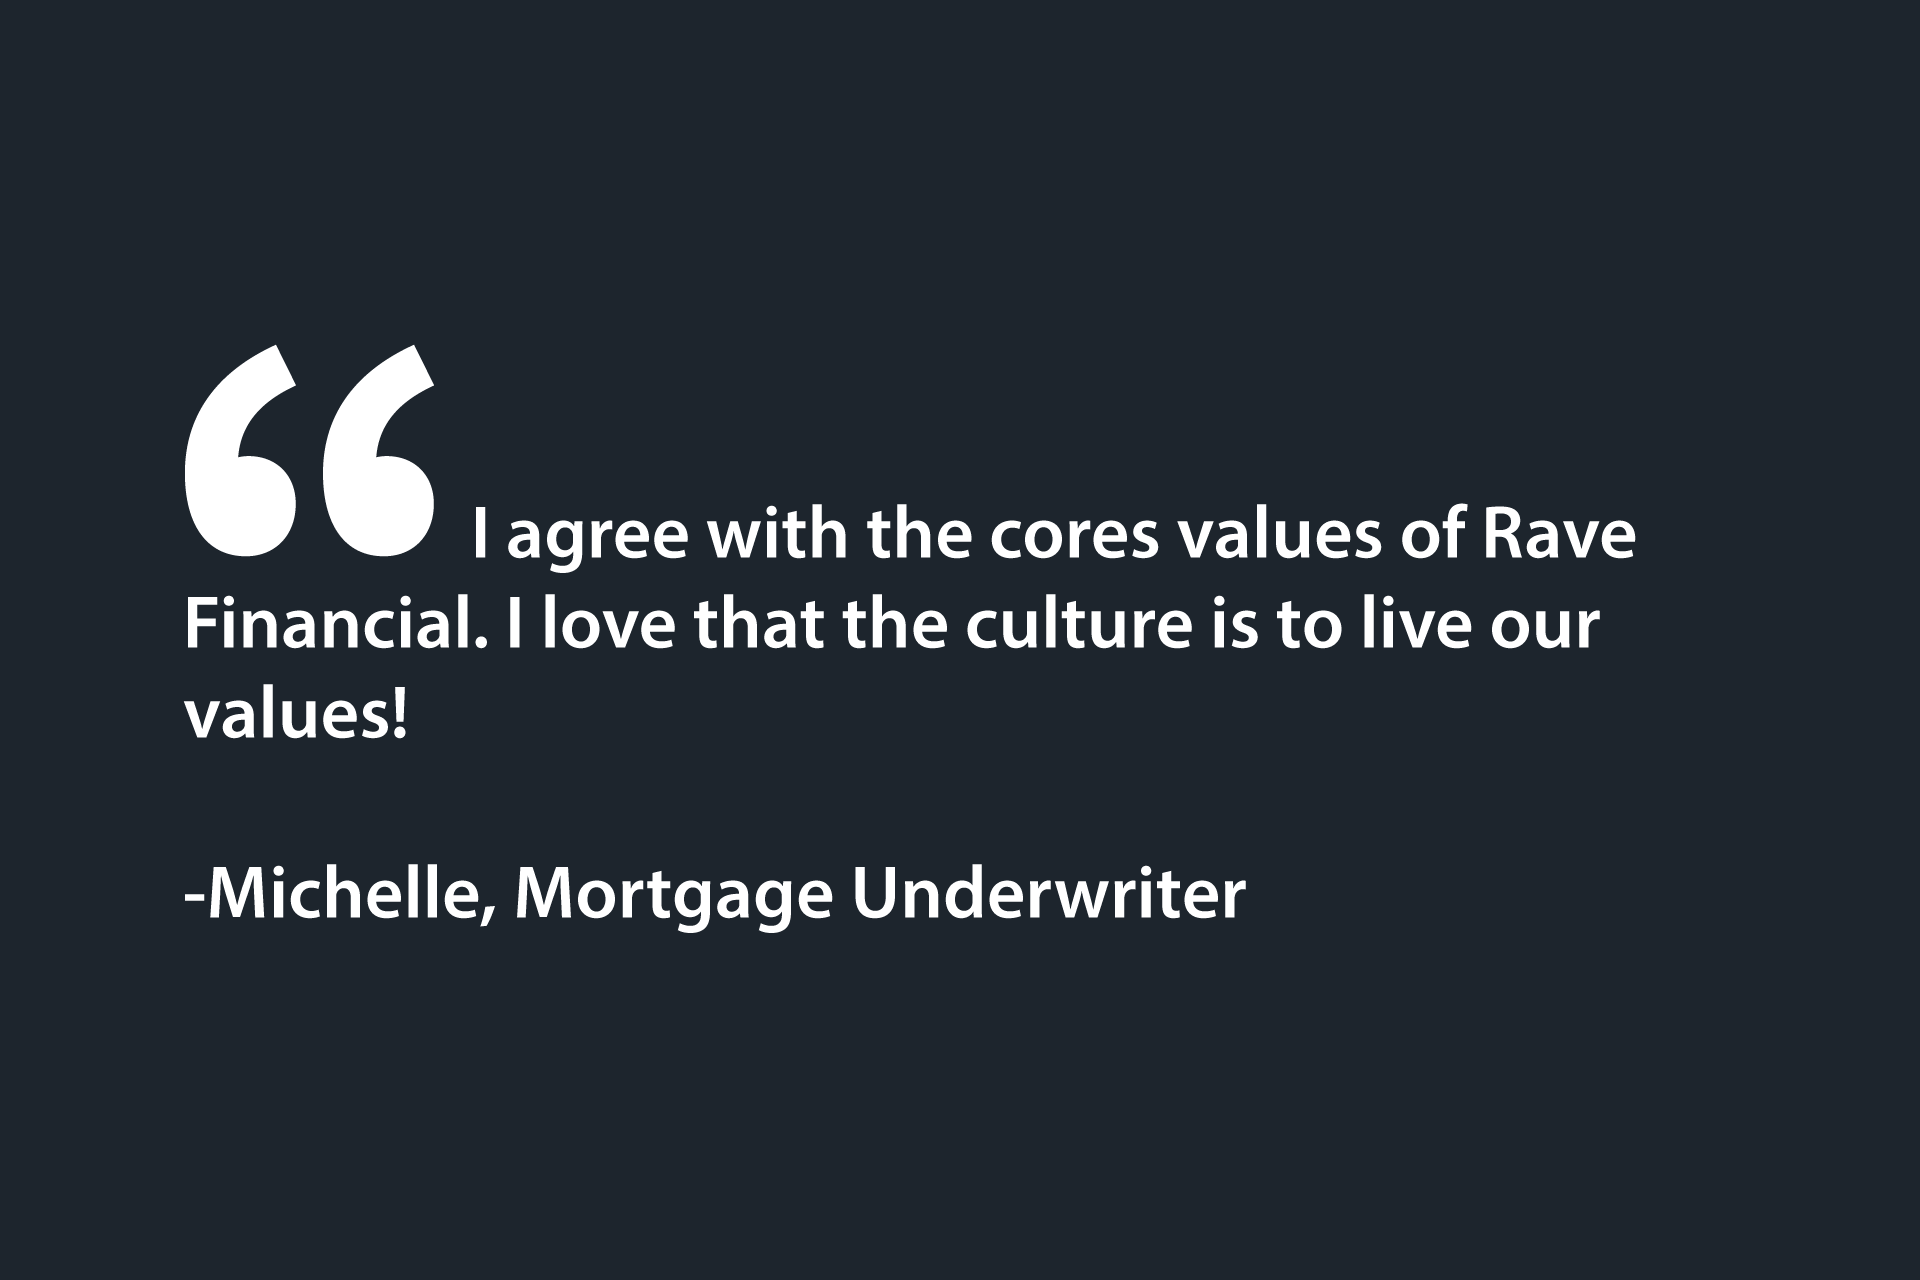 I agree with the cores values of Rave Financial. I love that the culture is to live our values! -Michelle, Mortgage Underwriter